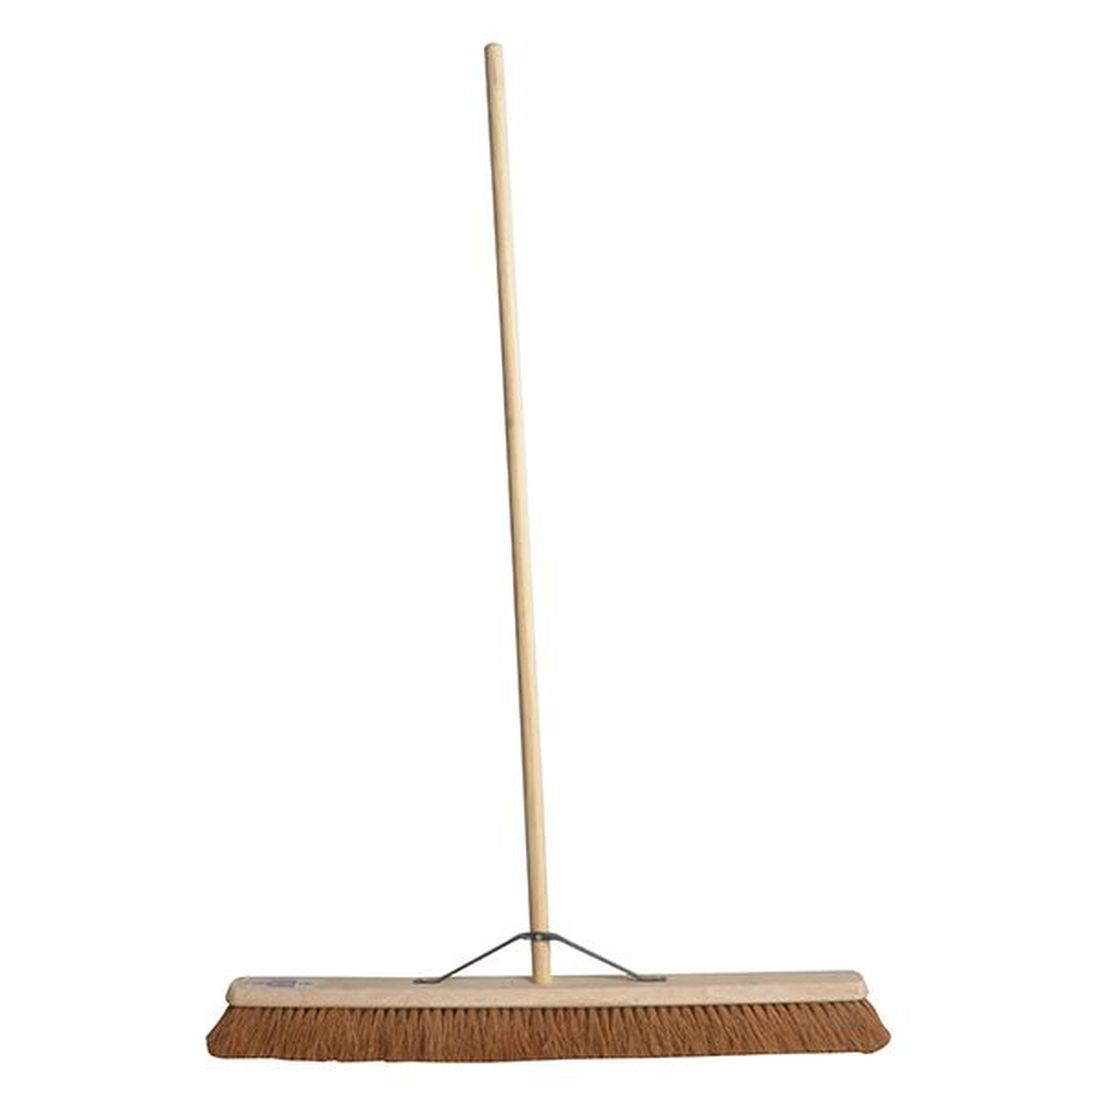 Faithfull Broom Soft Coco 900mm (36in) + Handle & Stay                                    